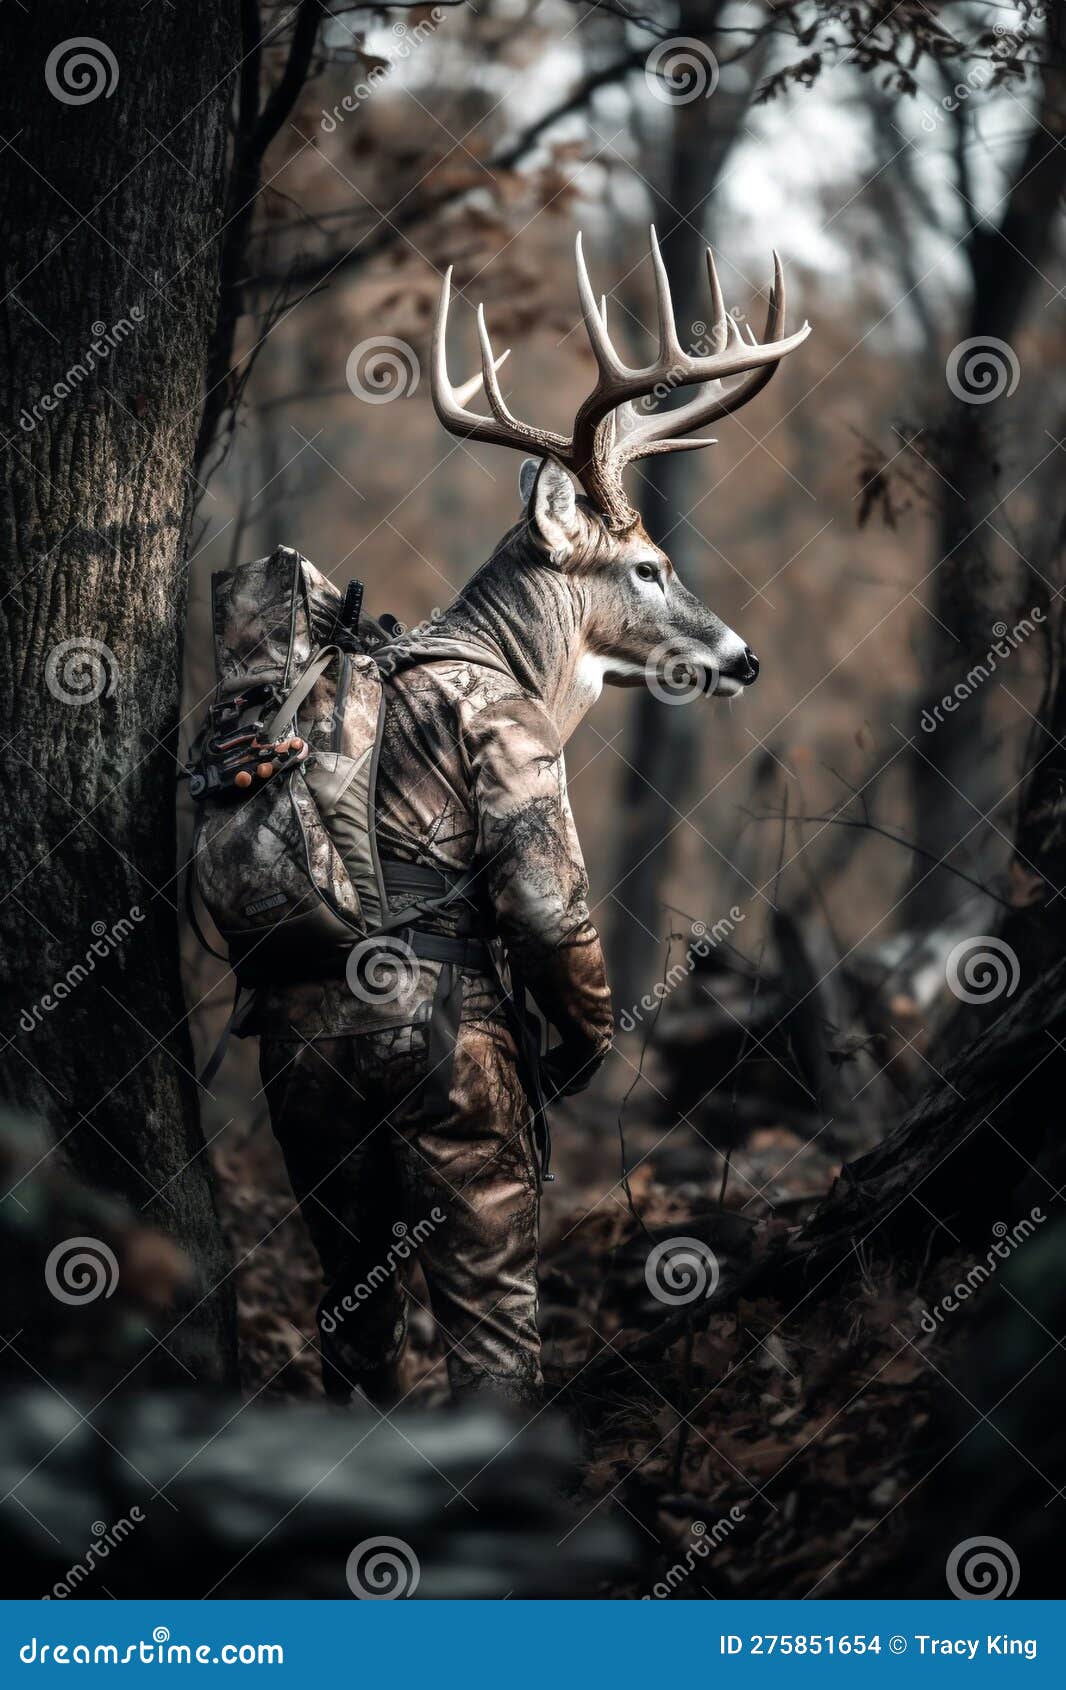 Desktop and Mobile Bowhunting Background Images | Bowhunting.com